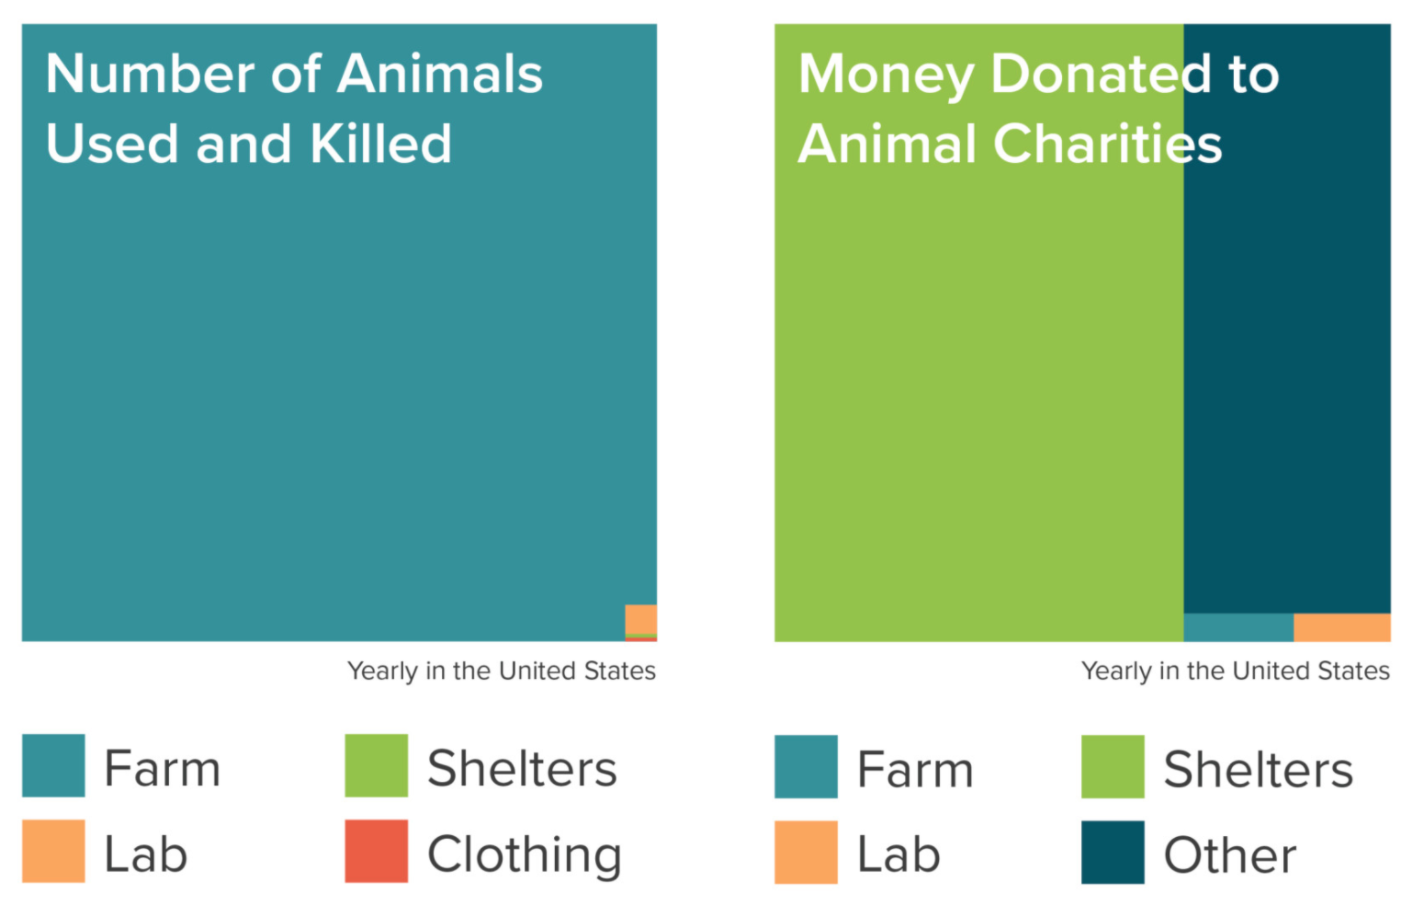 Comparing donations to animal charities